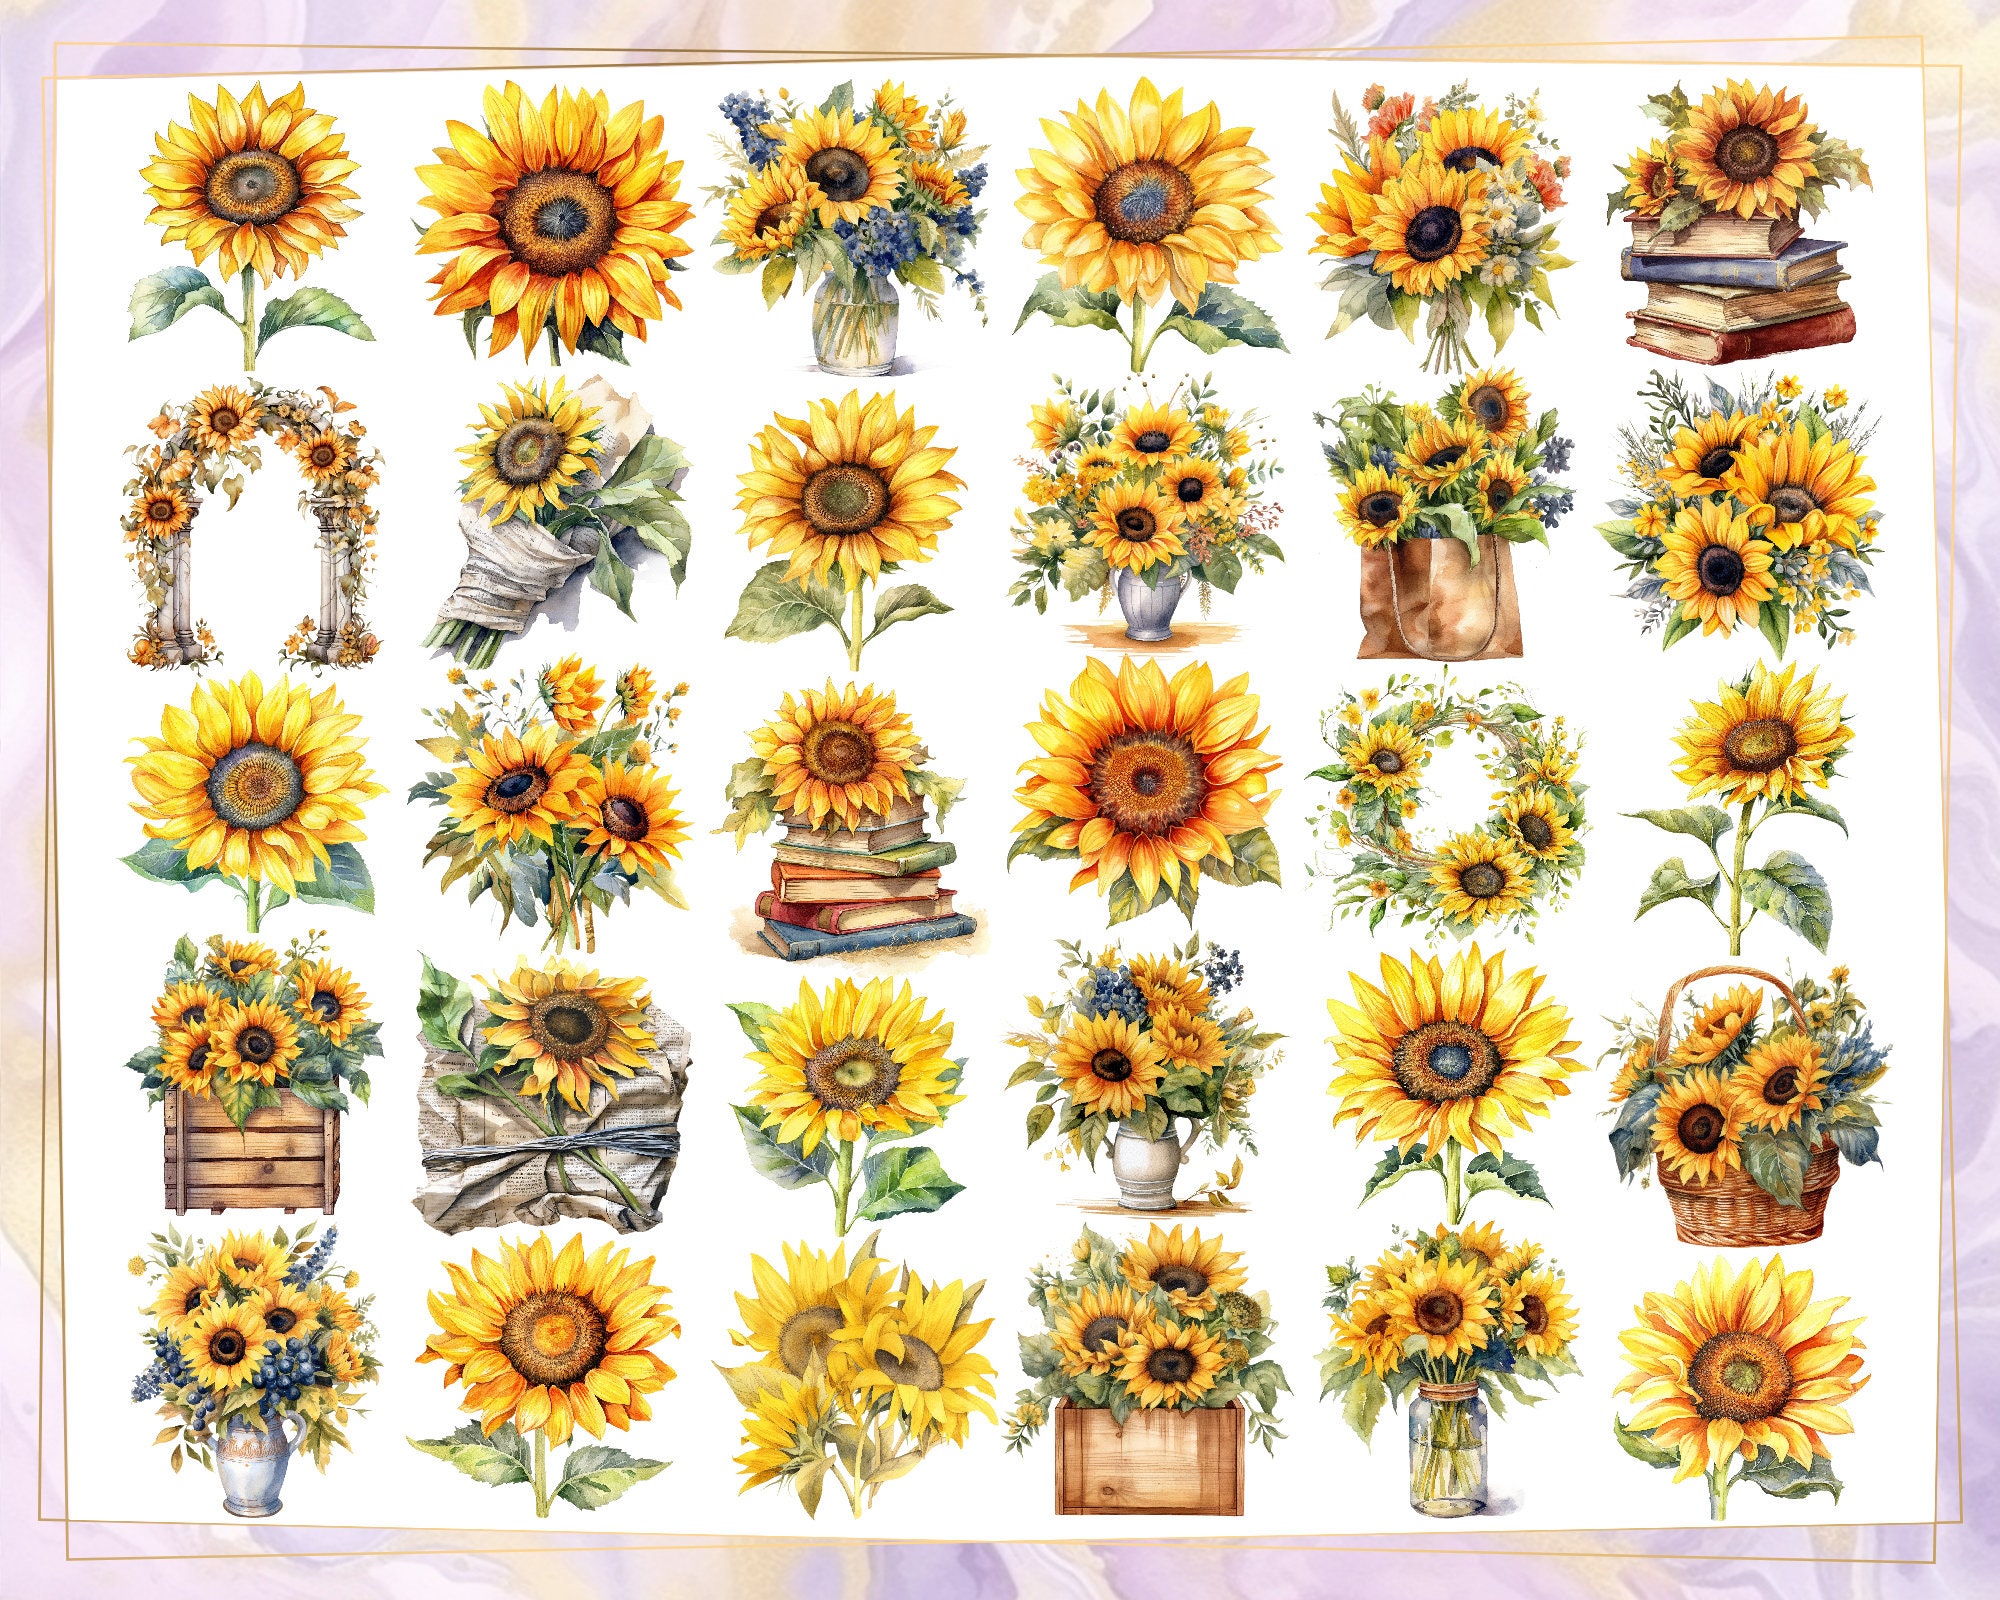 Sunflower Watercolor Style Illustrations. Yellow Sunflowers - Etsy